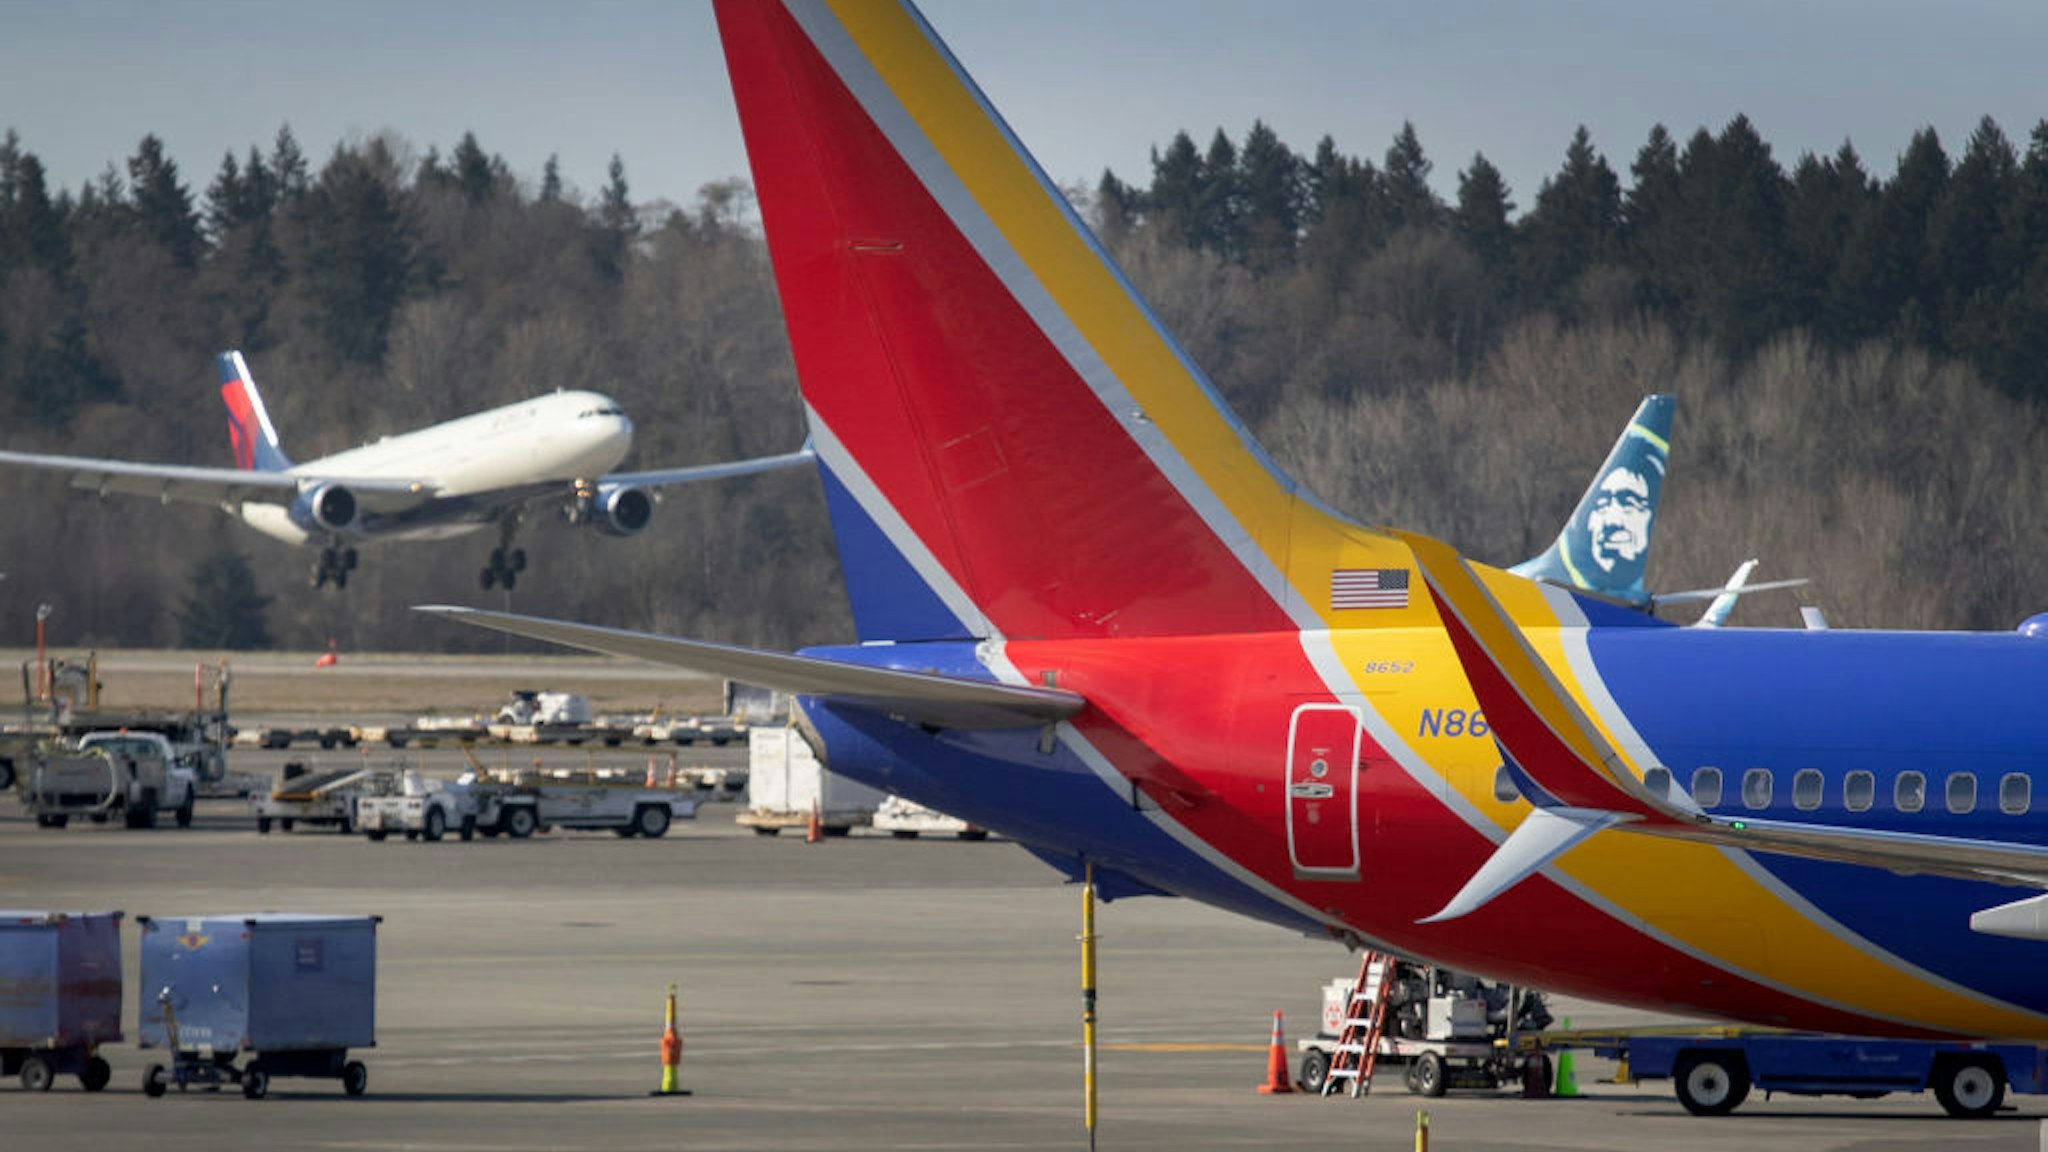 A flight lands at the Seattle-Tacoma International Airport on March 15, 2020 in Seattle, Washington.